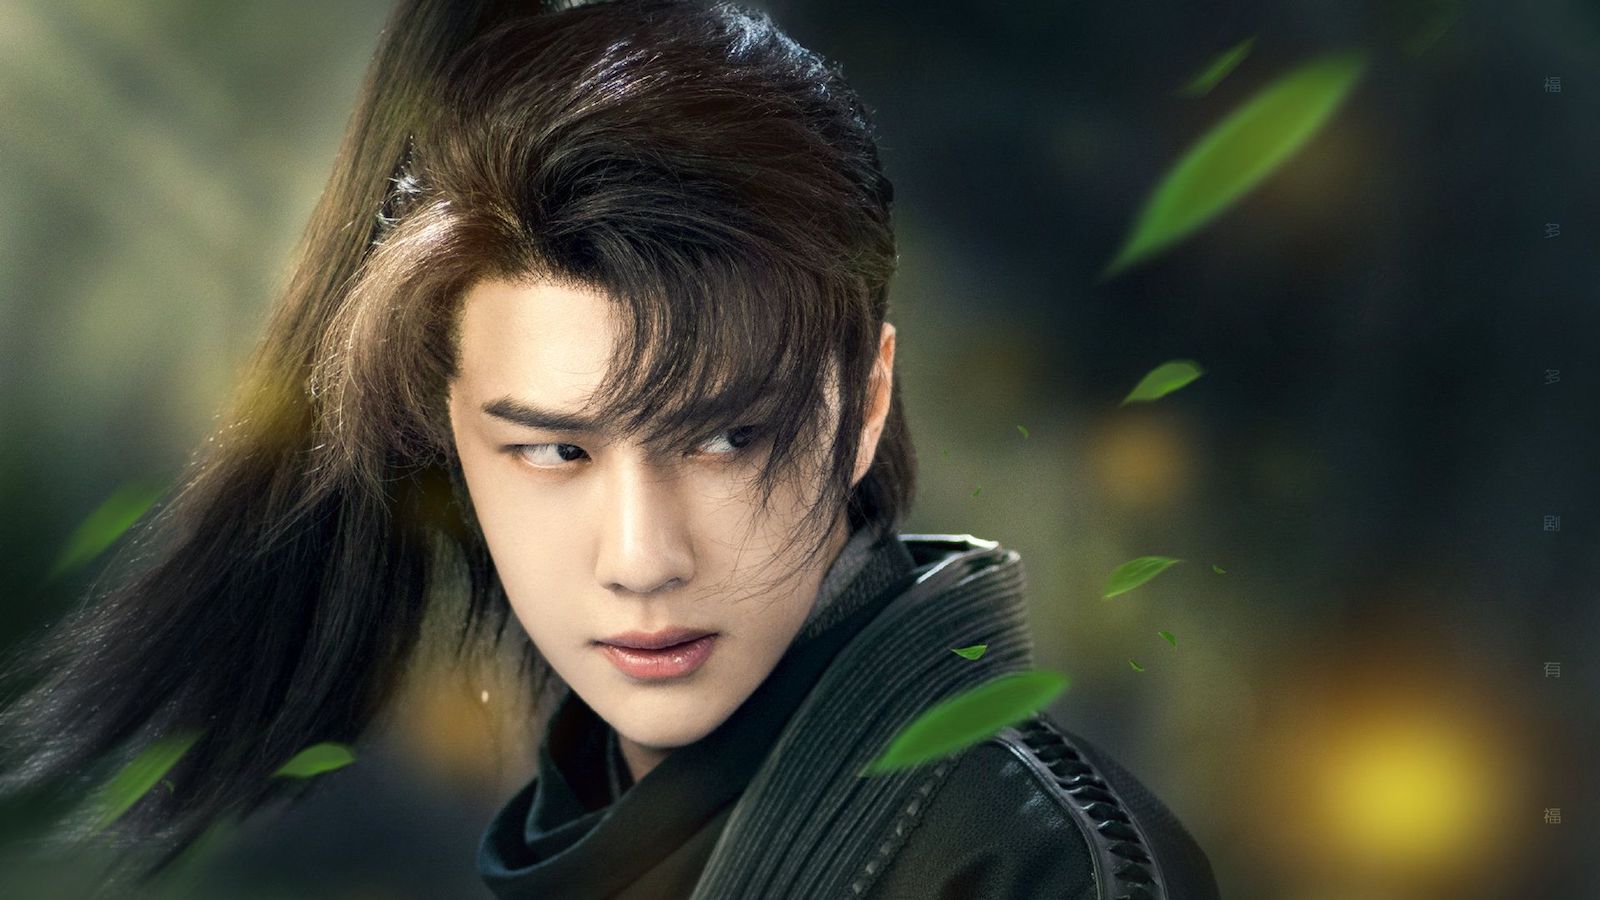 Fans of 'The Untamed' helped make Wang Yibo an international star. Now, Yibo is back on TV in 'Legend of Fei'. Get to know Wang Yibo's new show.